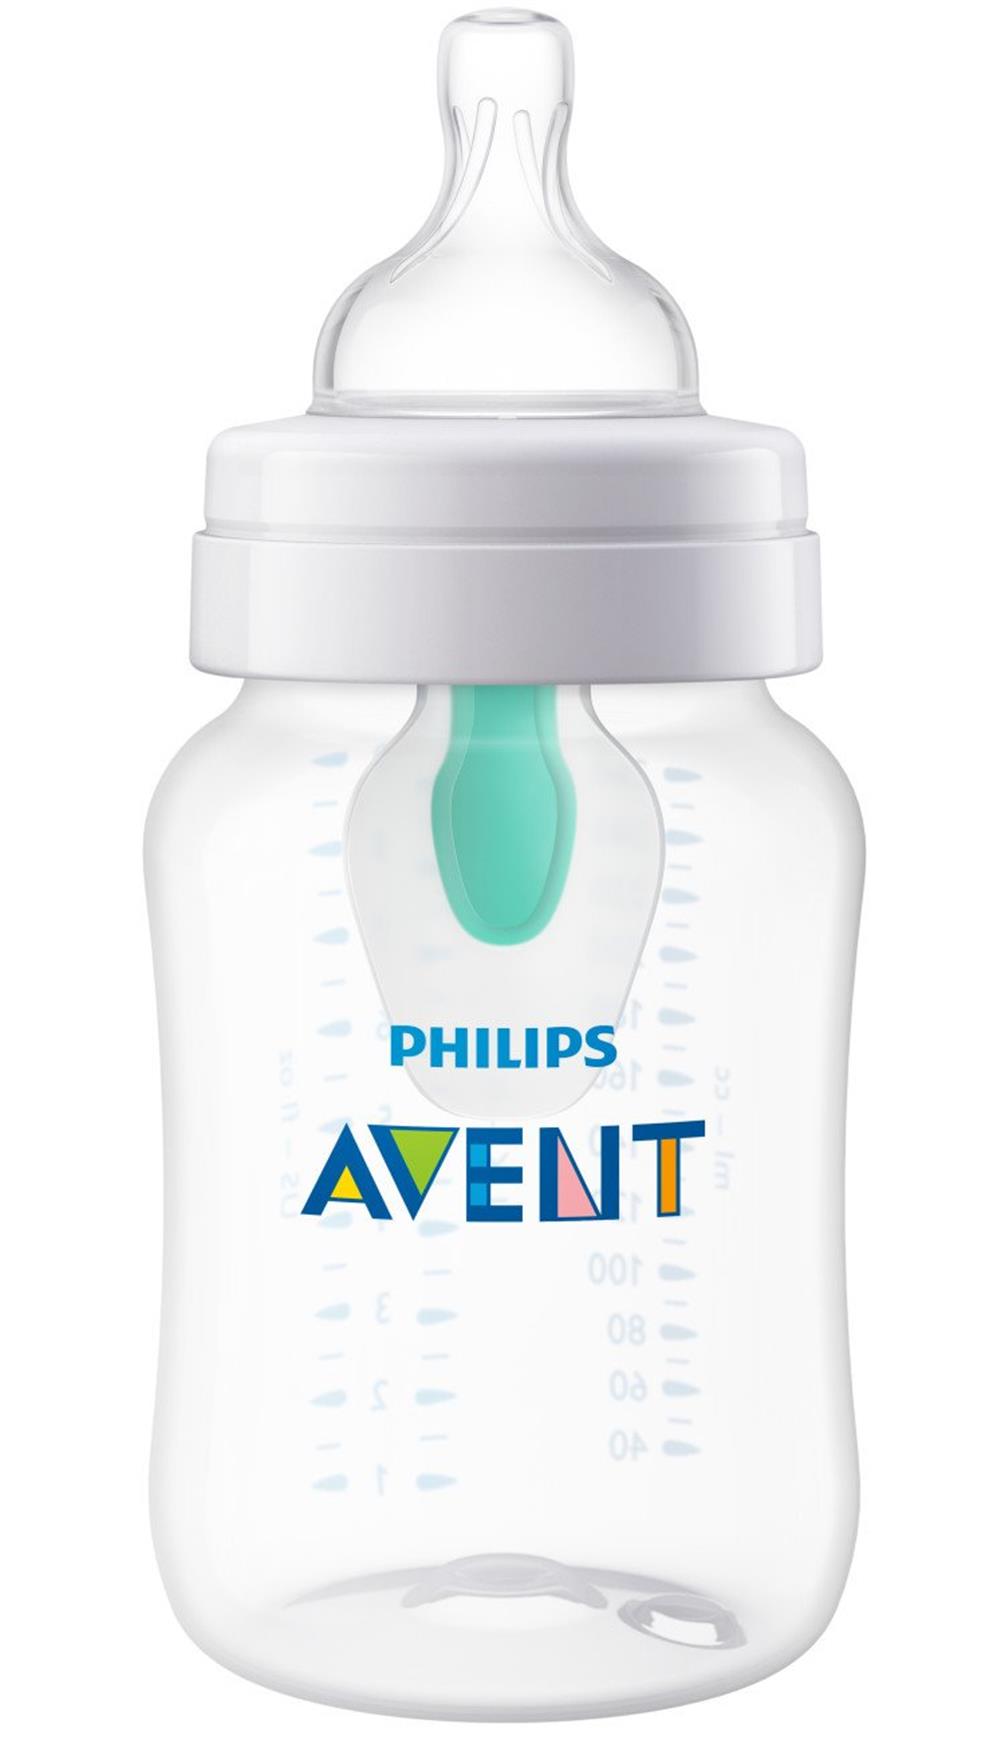 Philips Avent Anti-colic Baby Bottle with AirFree vent 9oz, Clear